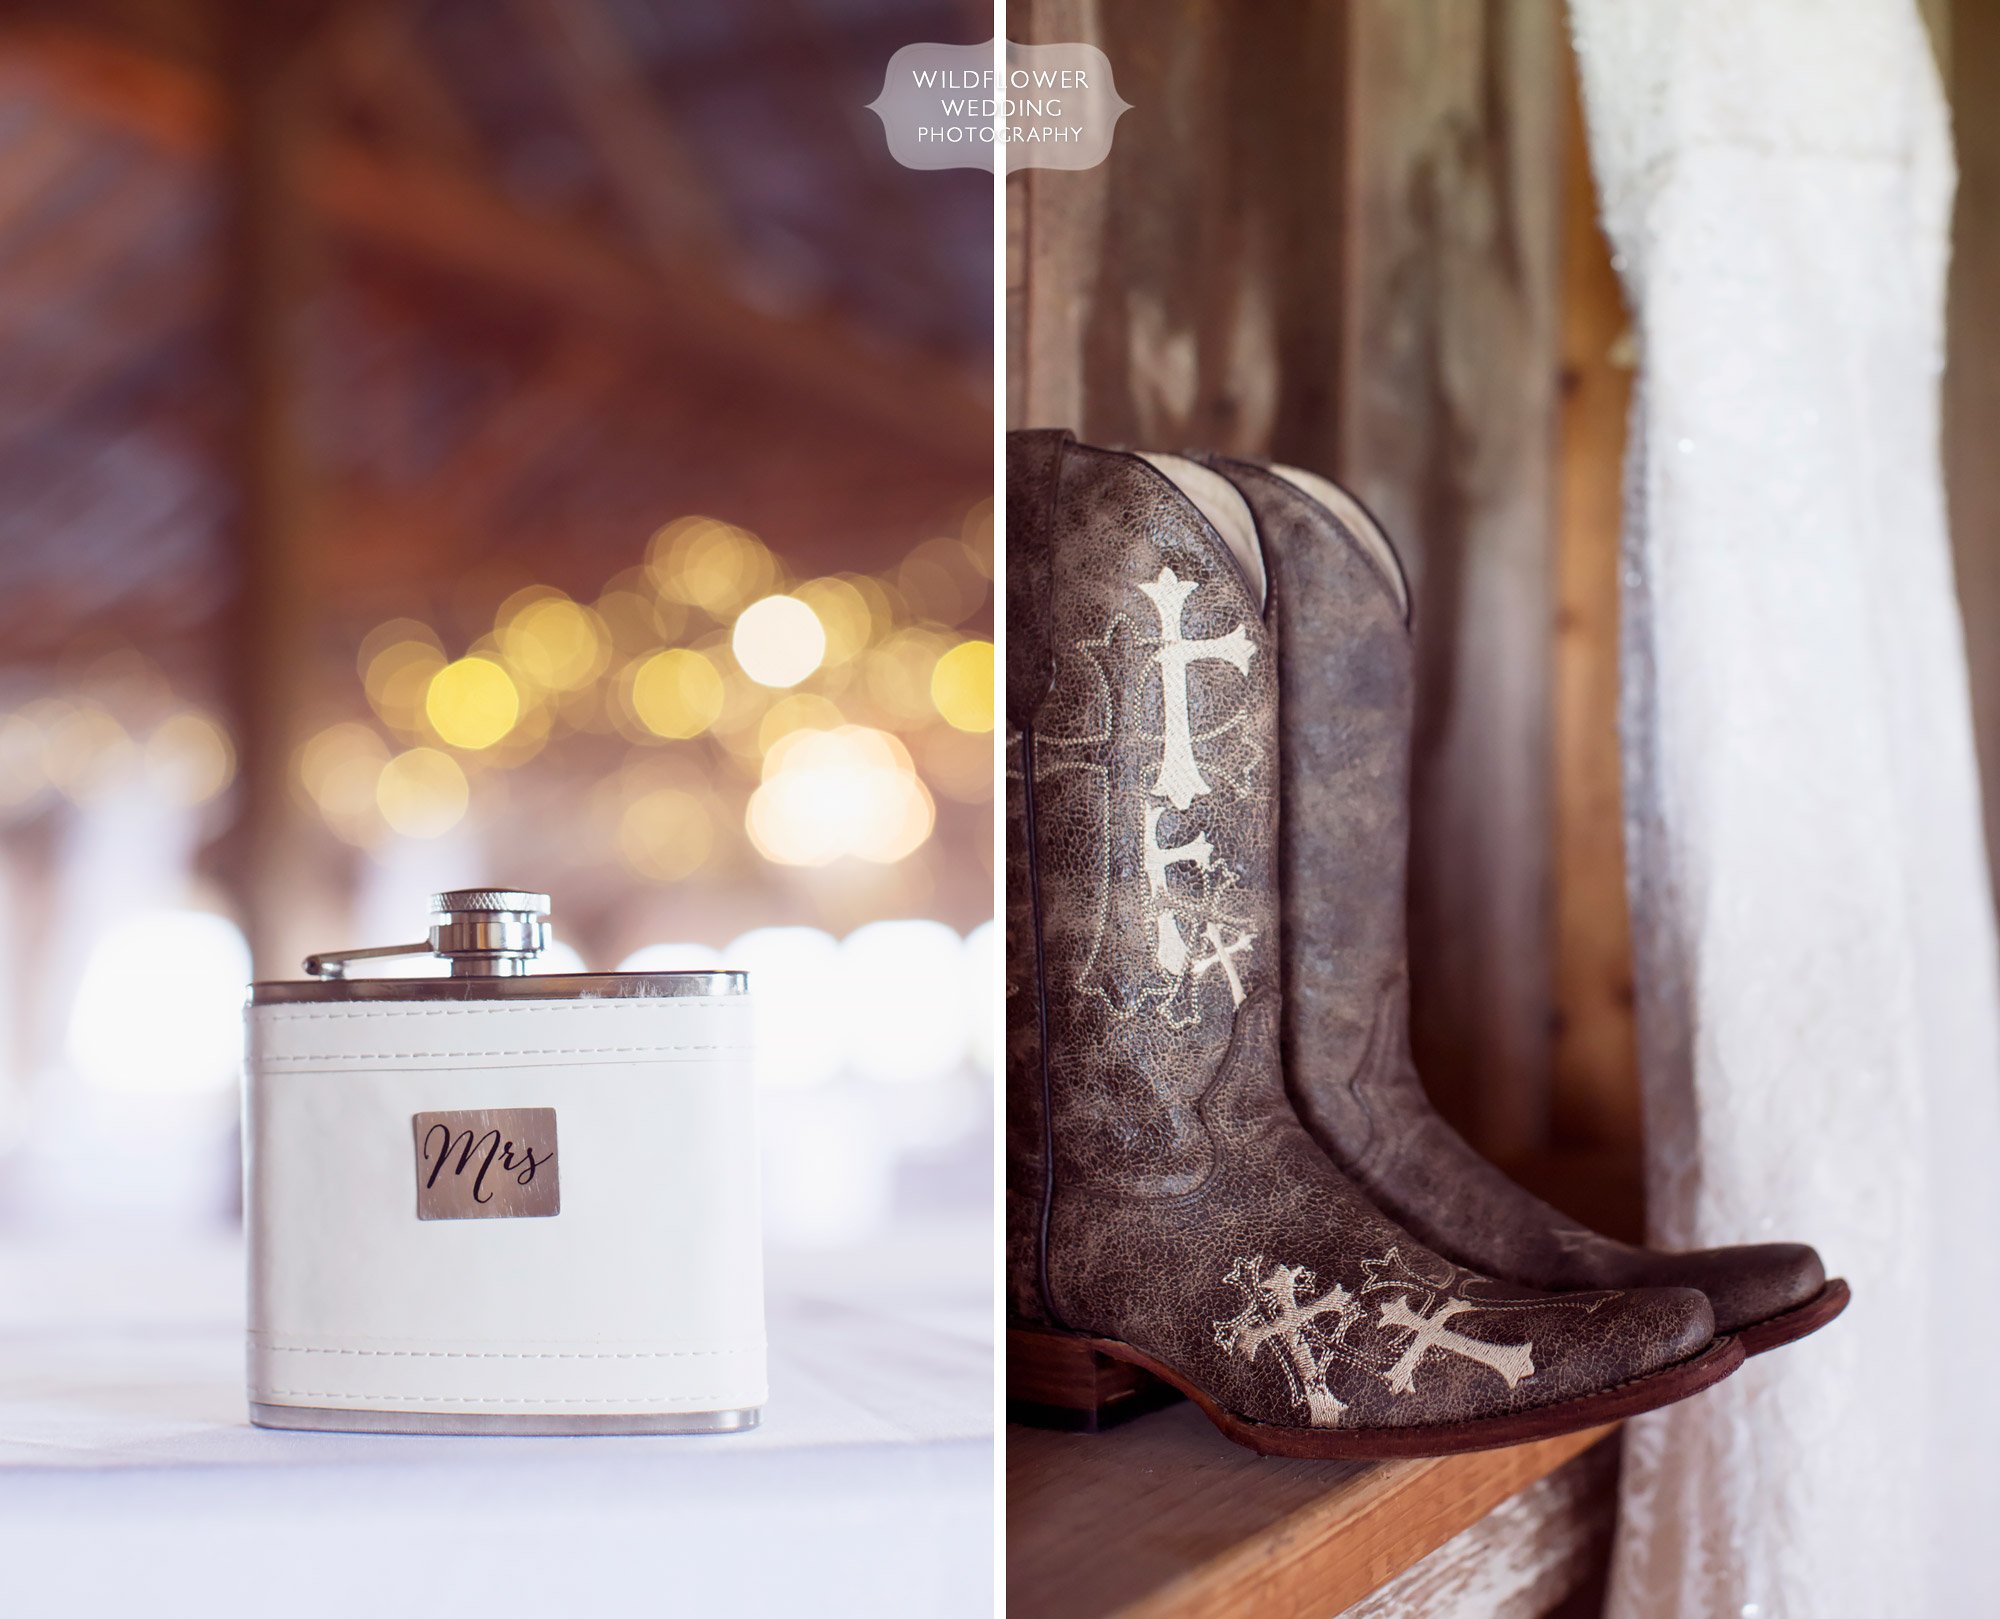 Country wedding ideas with cowboy boots and a classy white leather Mrs. flask!